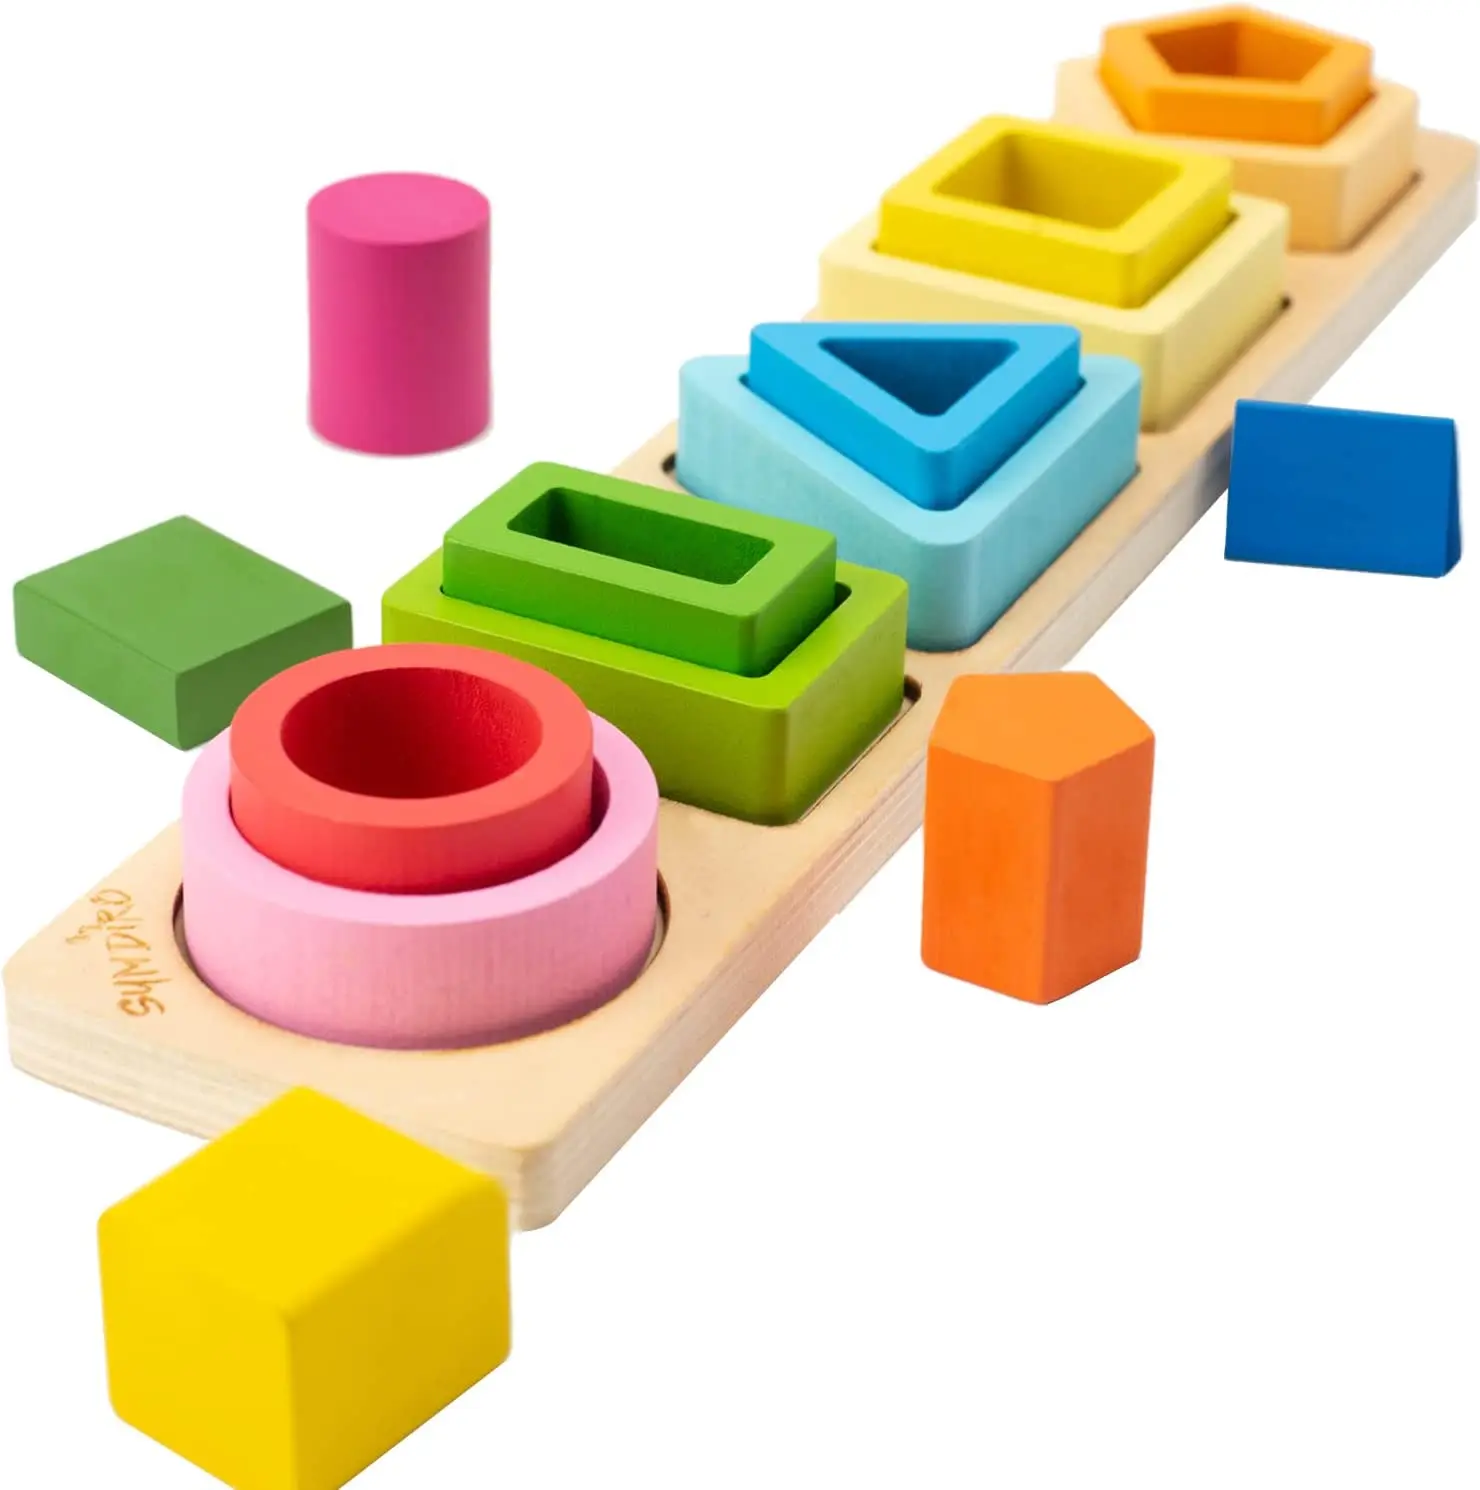 

Montessori Wood Toys for Kids Wooden Sorting Stacking Toys for Baby Toddlers Educational Shape Color Sorter Preschool Kids Gifts